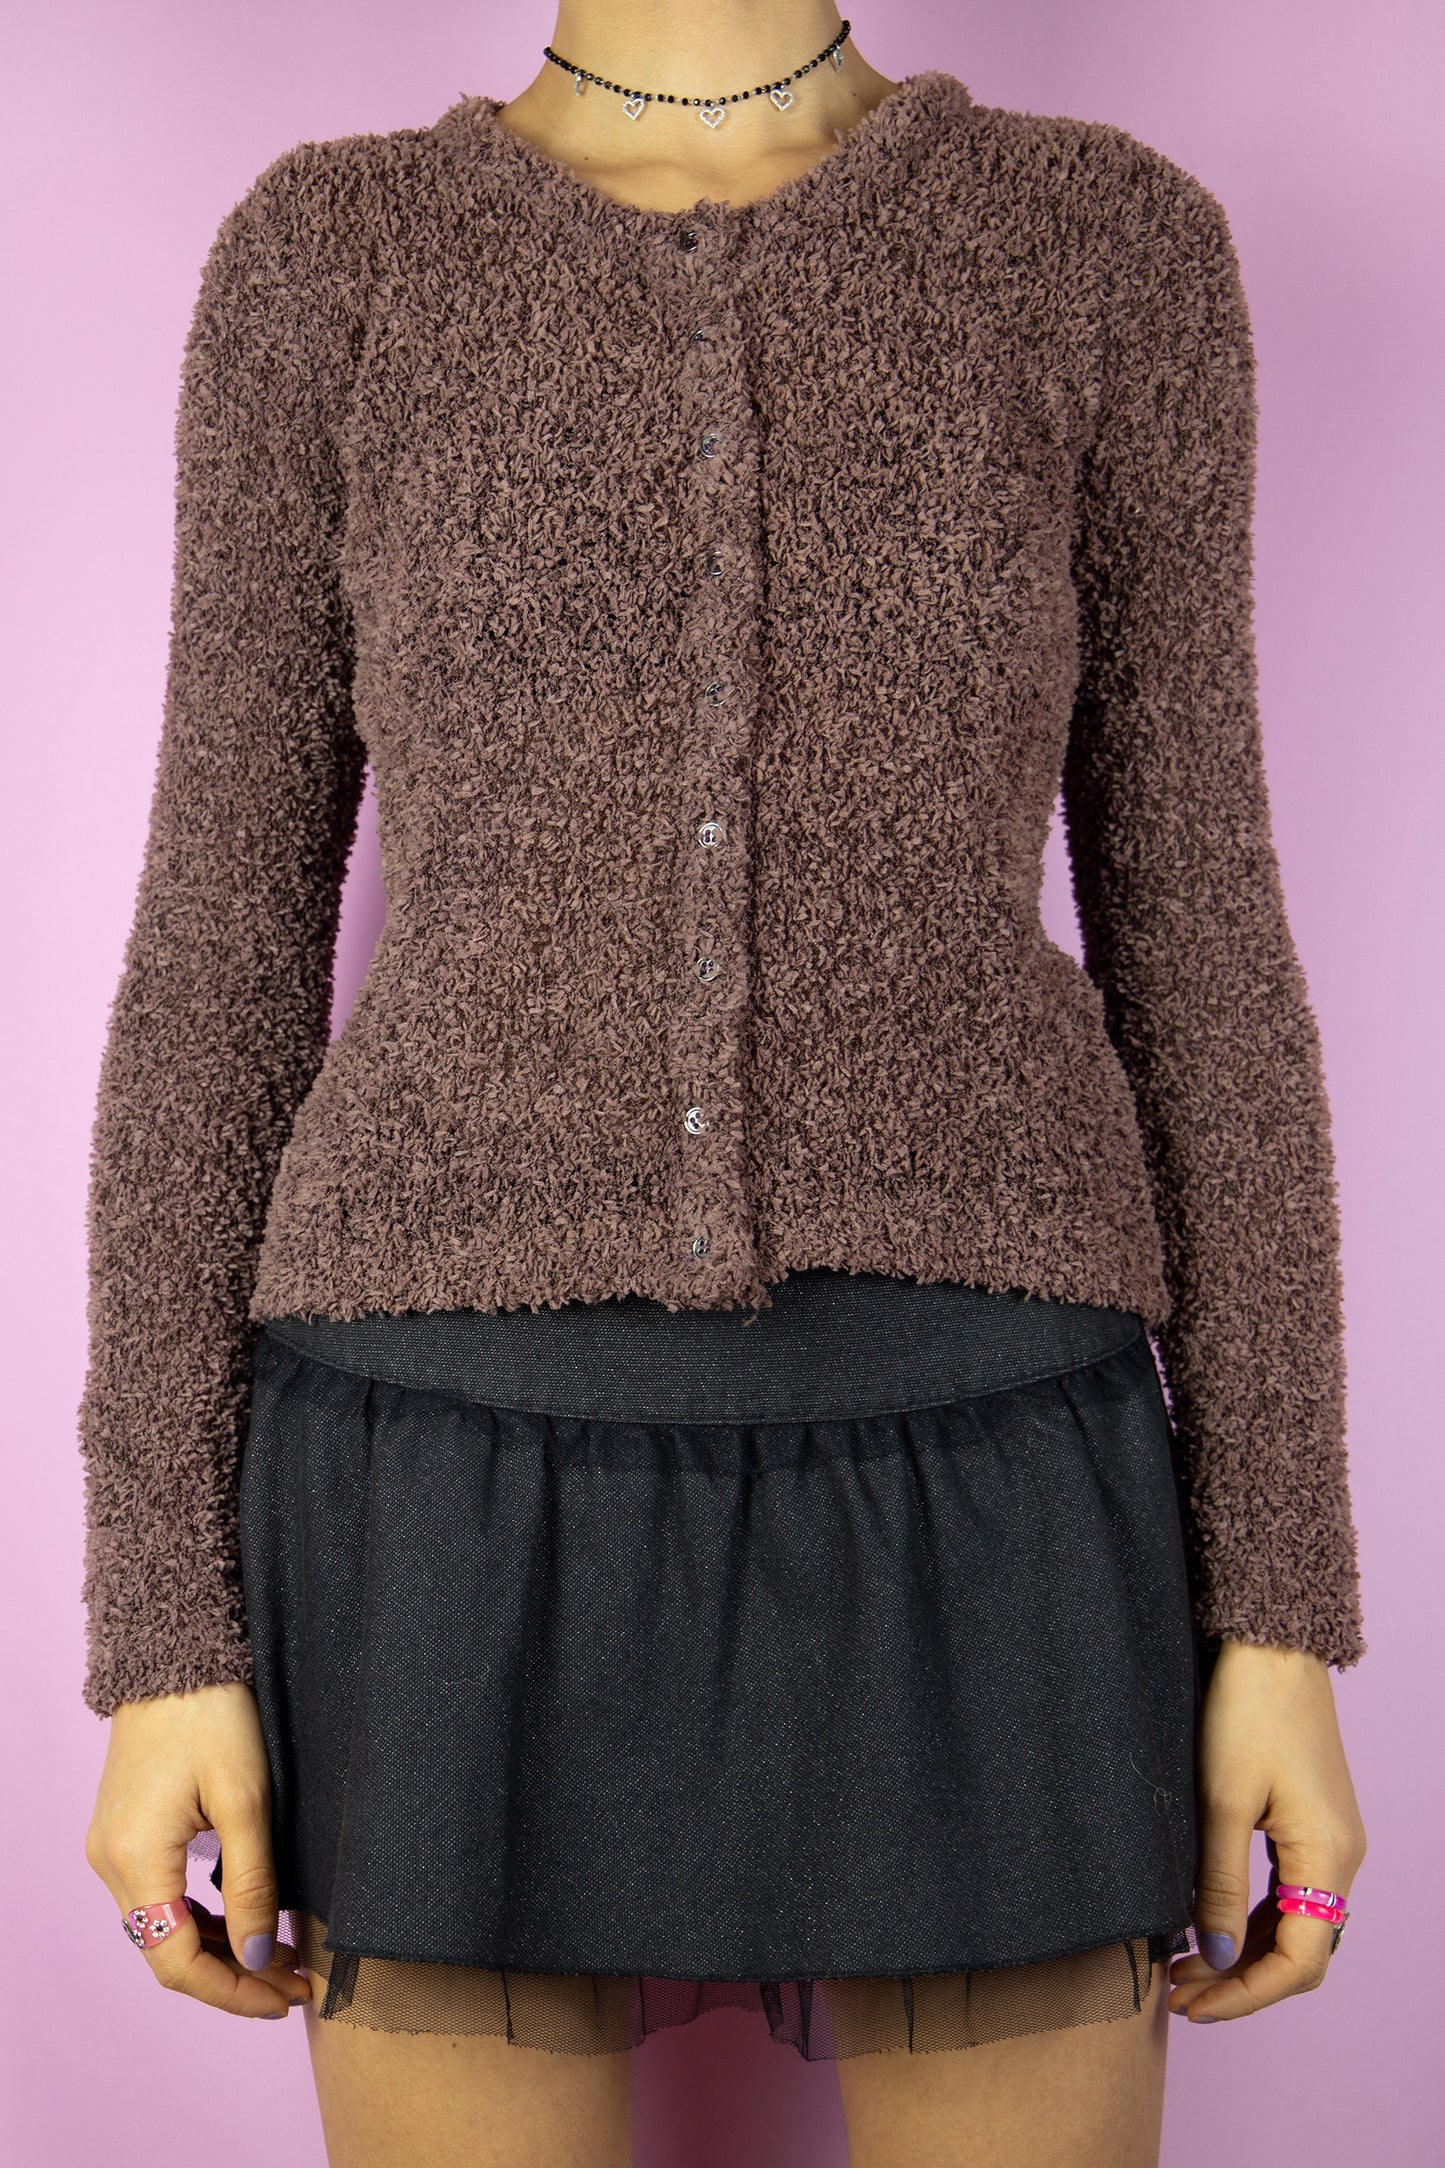 The Vintage 90s Brown Fairy Grunge Cardigan is a fuzzy knit cardigan with buttons. Boho 1990s sweater.